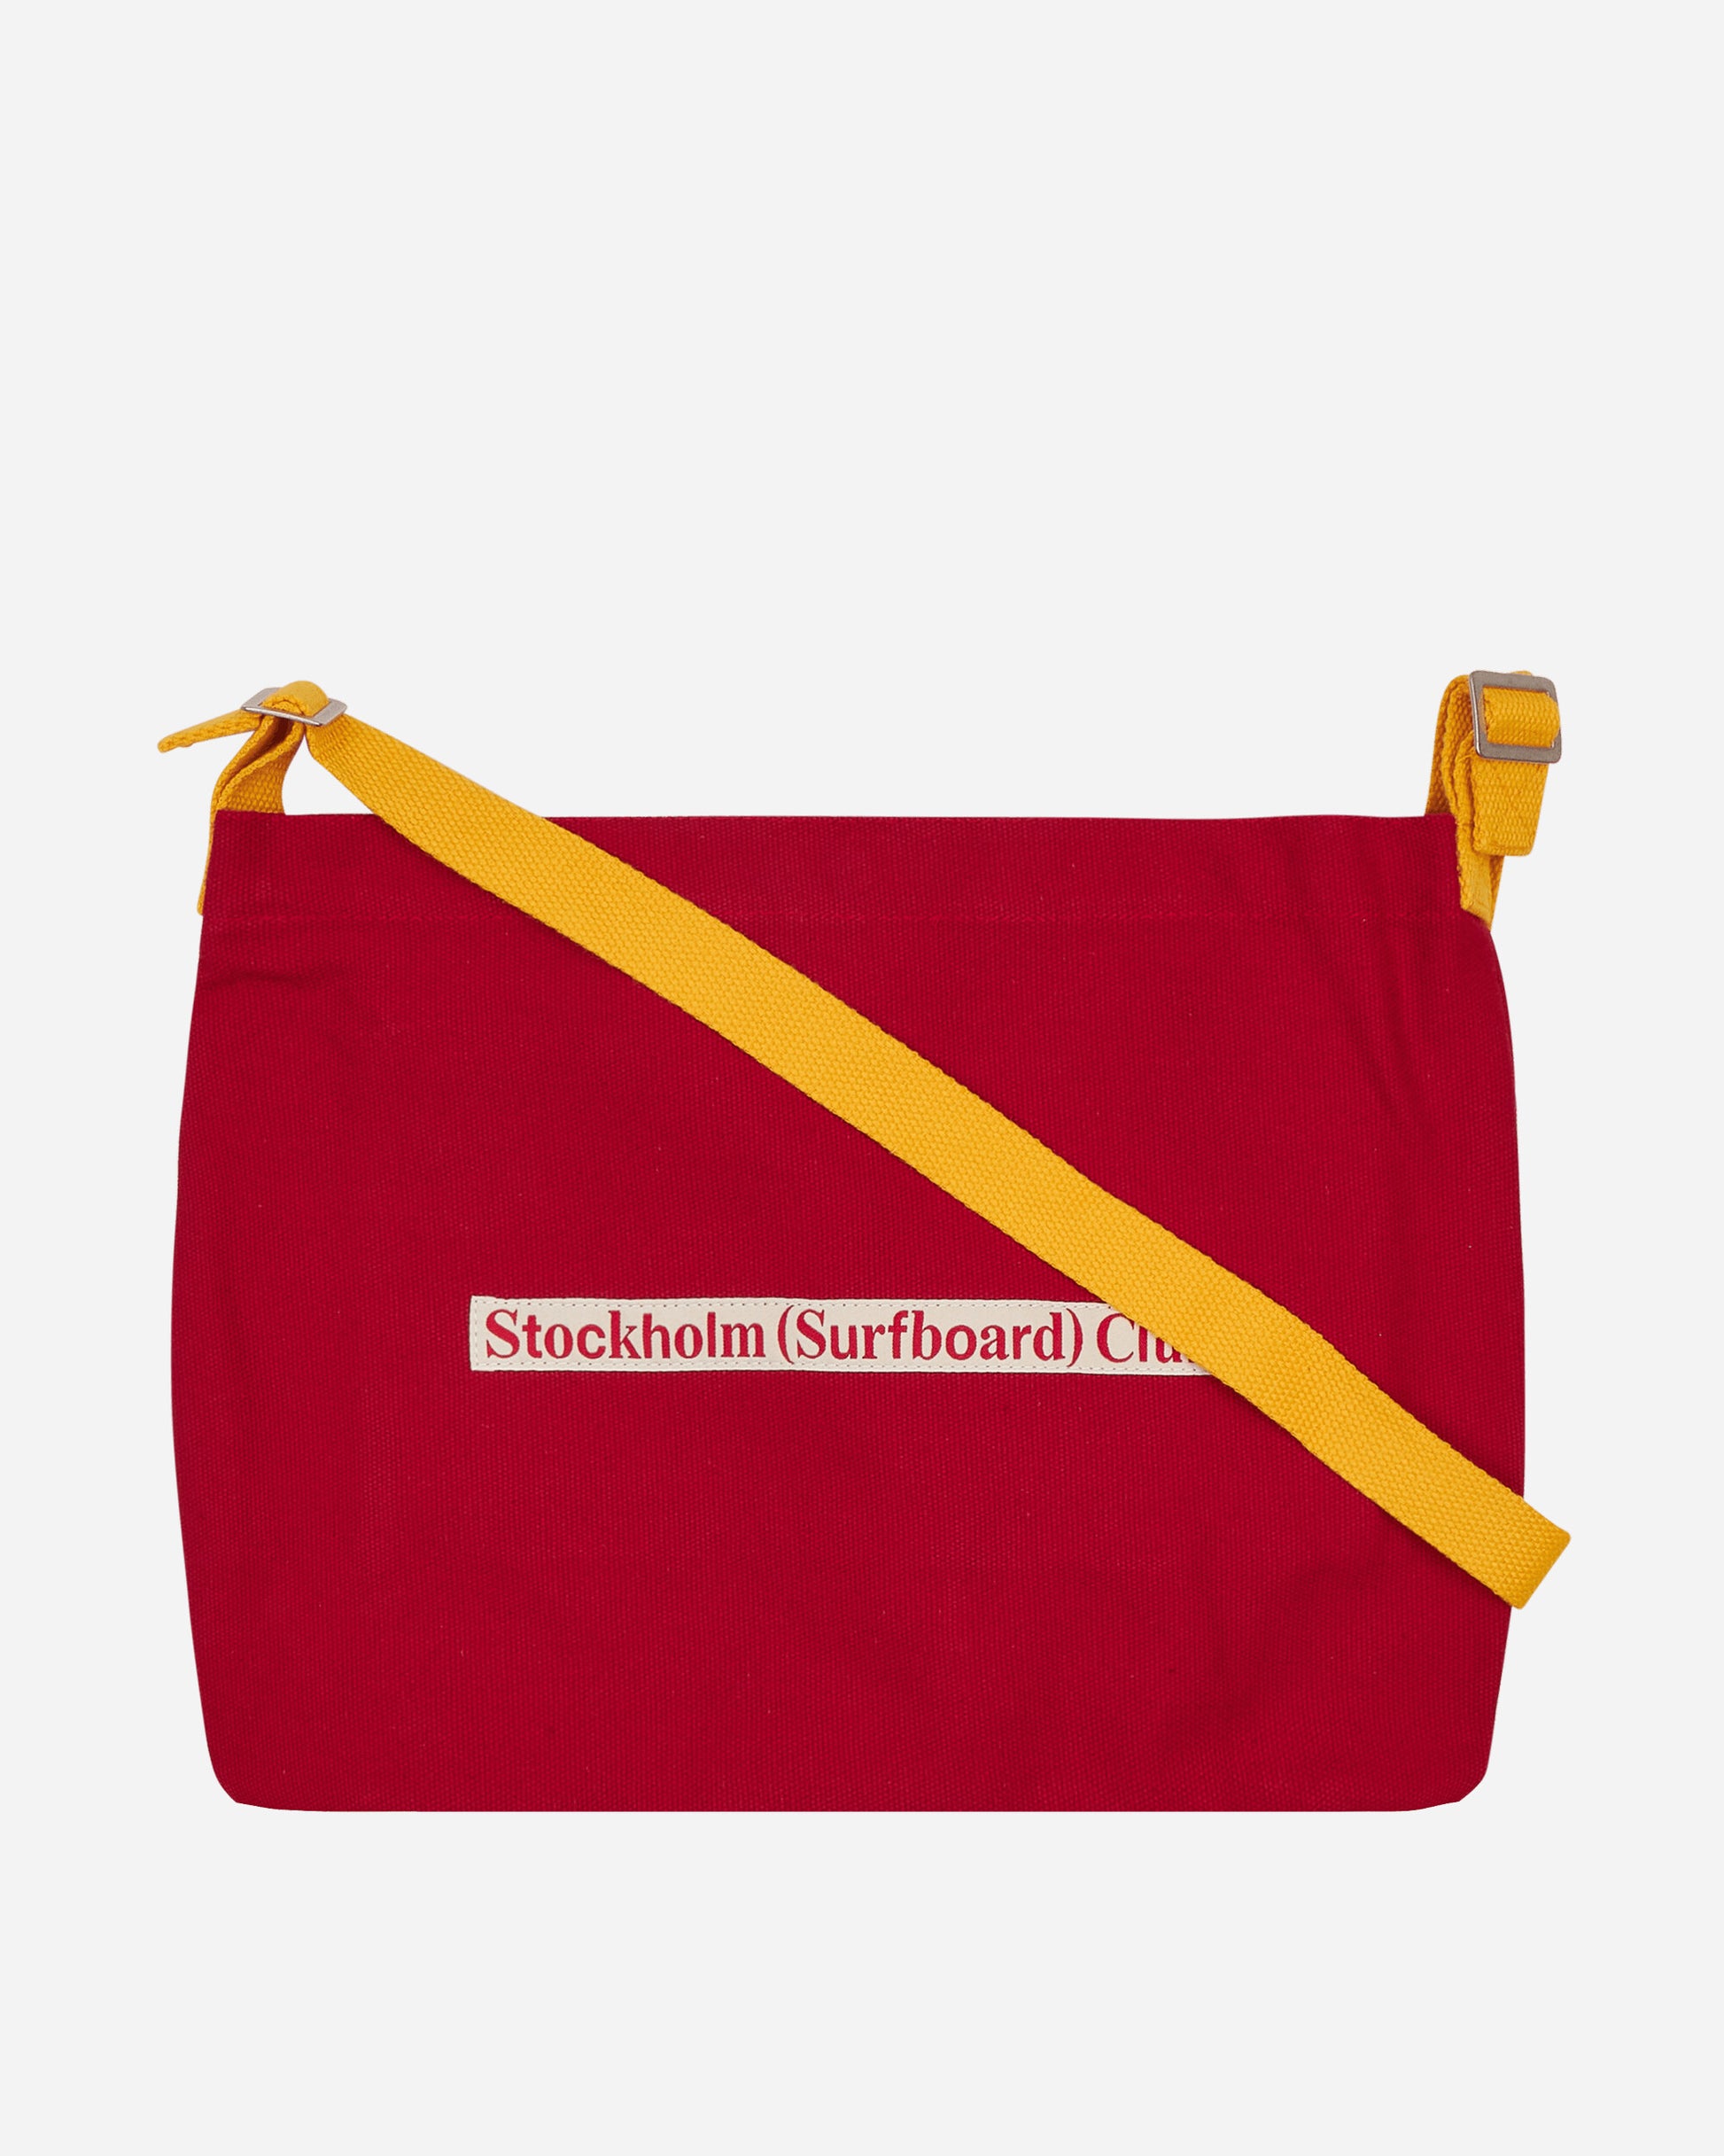 Stockholm (Surfboard) Club Flat Red Bags and Backpacks Pouches FU7R40 001